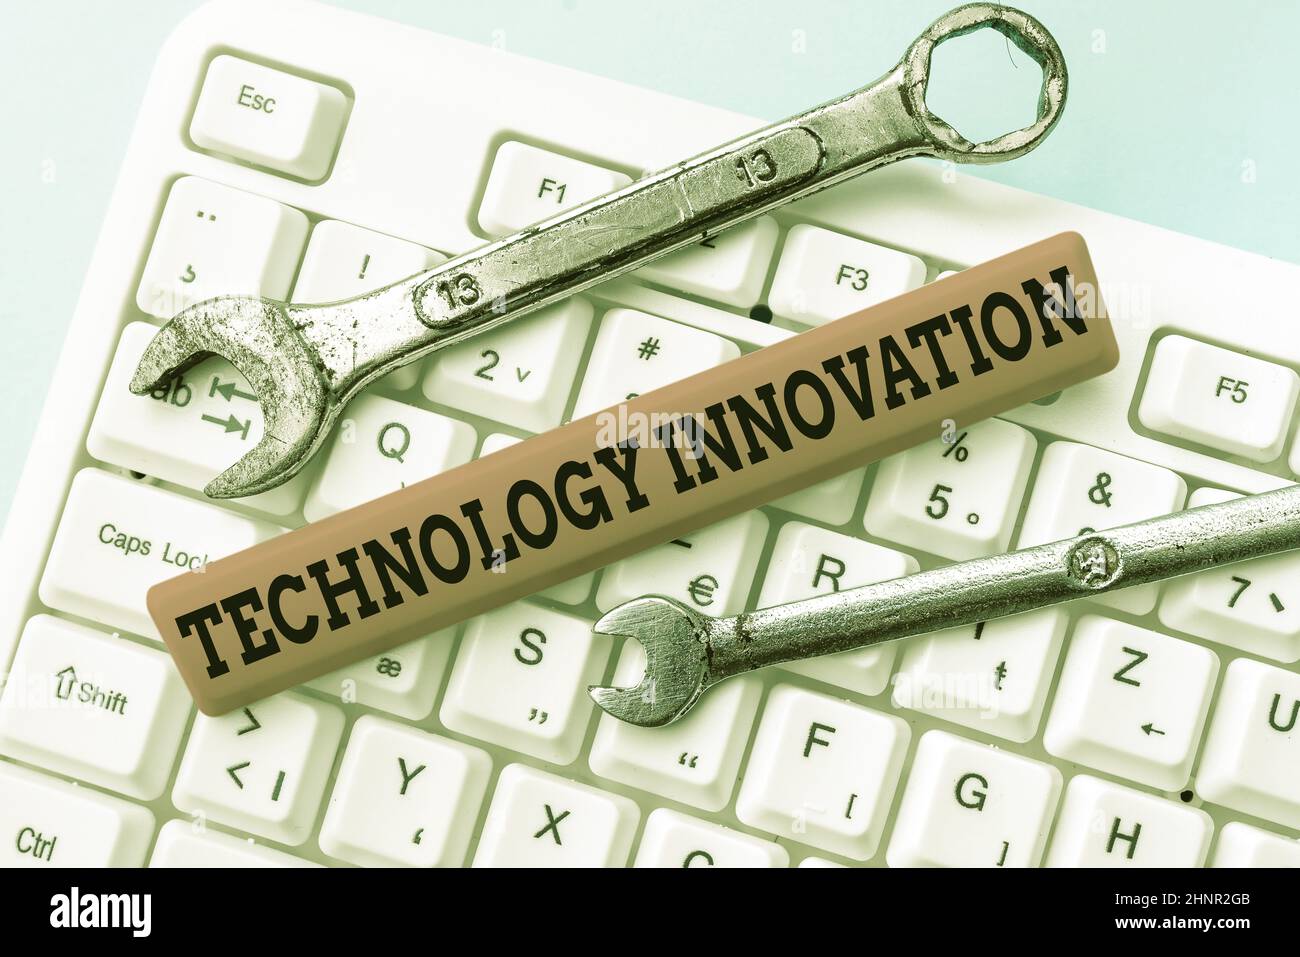 Text showing inspiration Technology Innovation. Business idea advanced net connected devices a Creative Technique Downloading Online Files And Data, Uploading Programming Codes Stock Photo